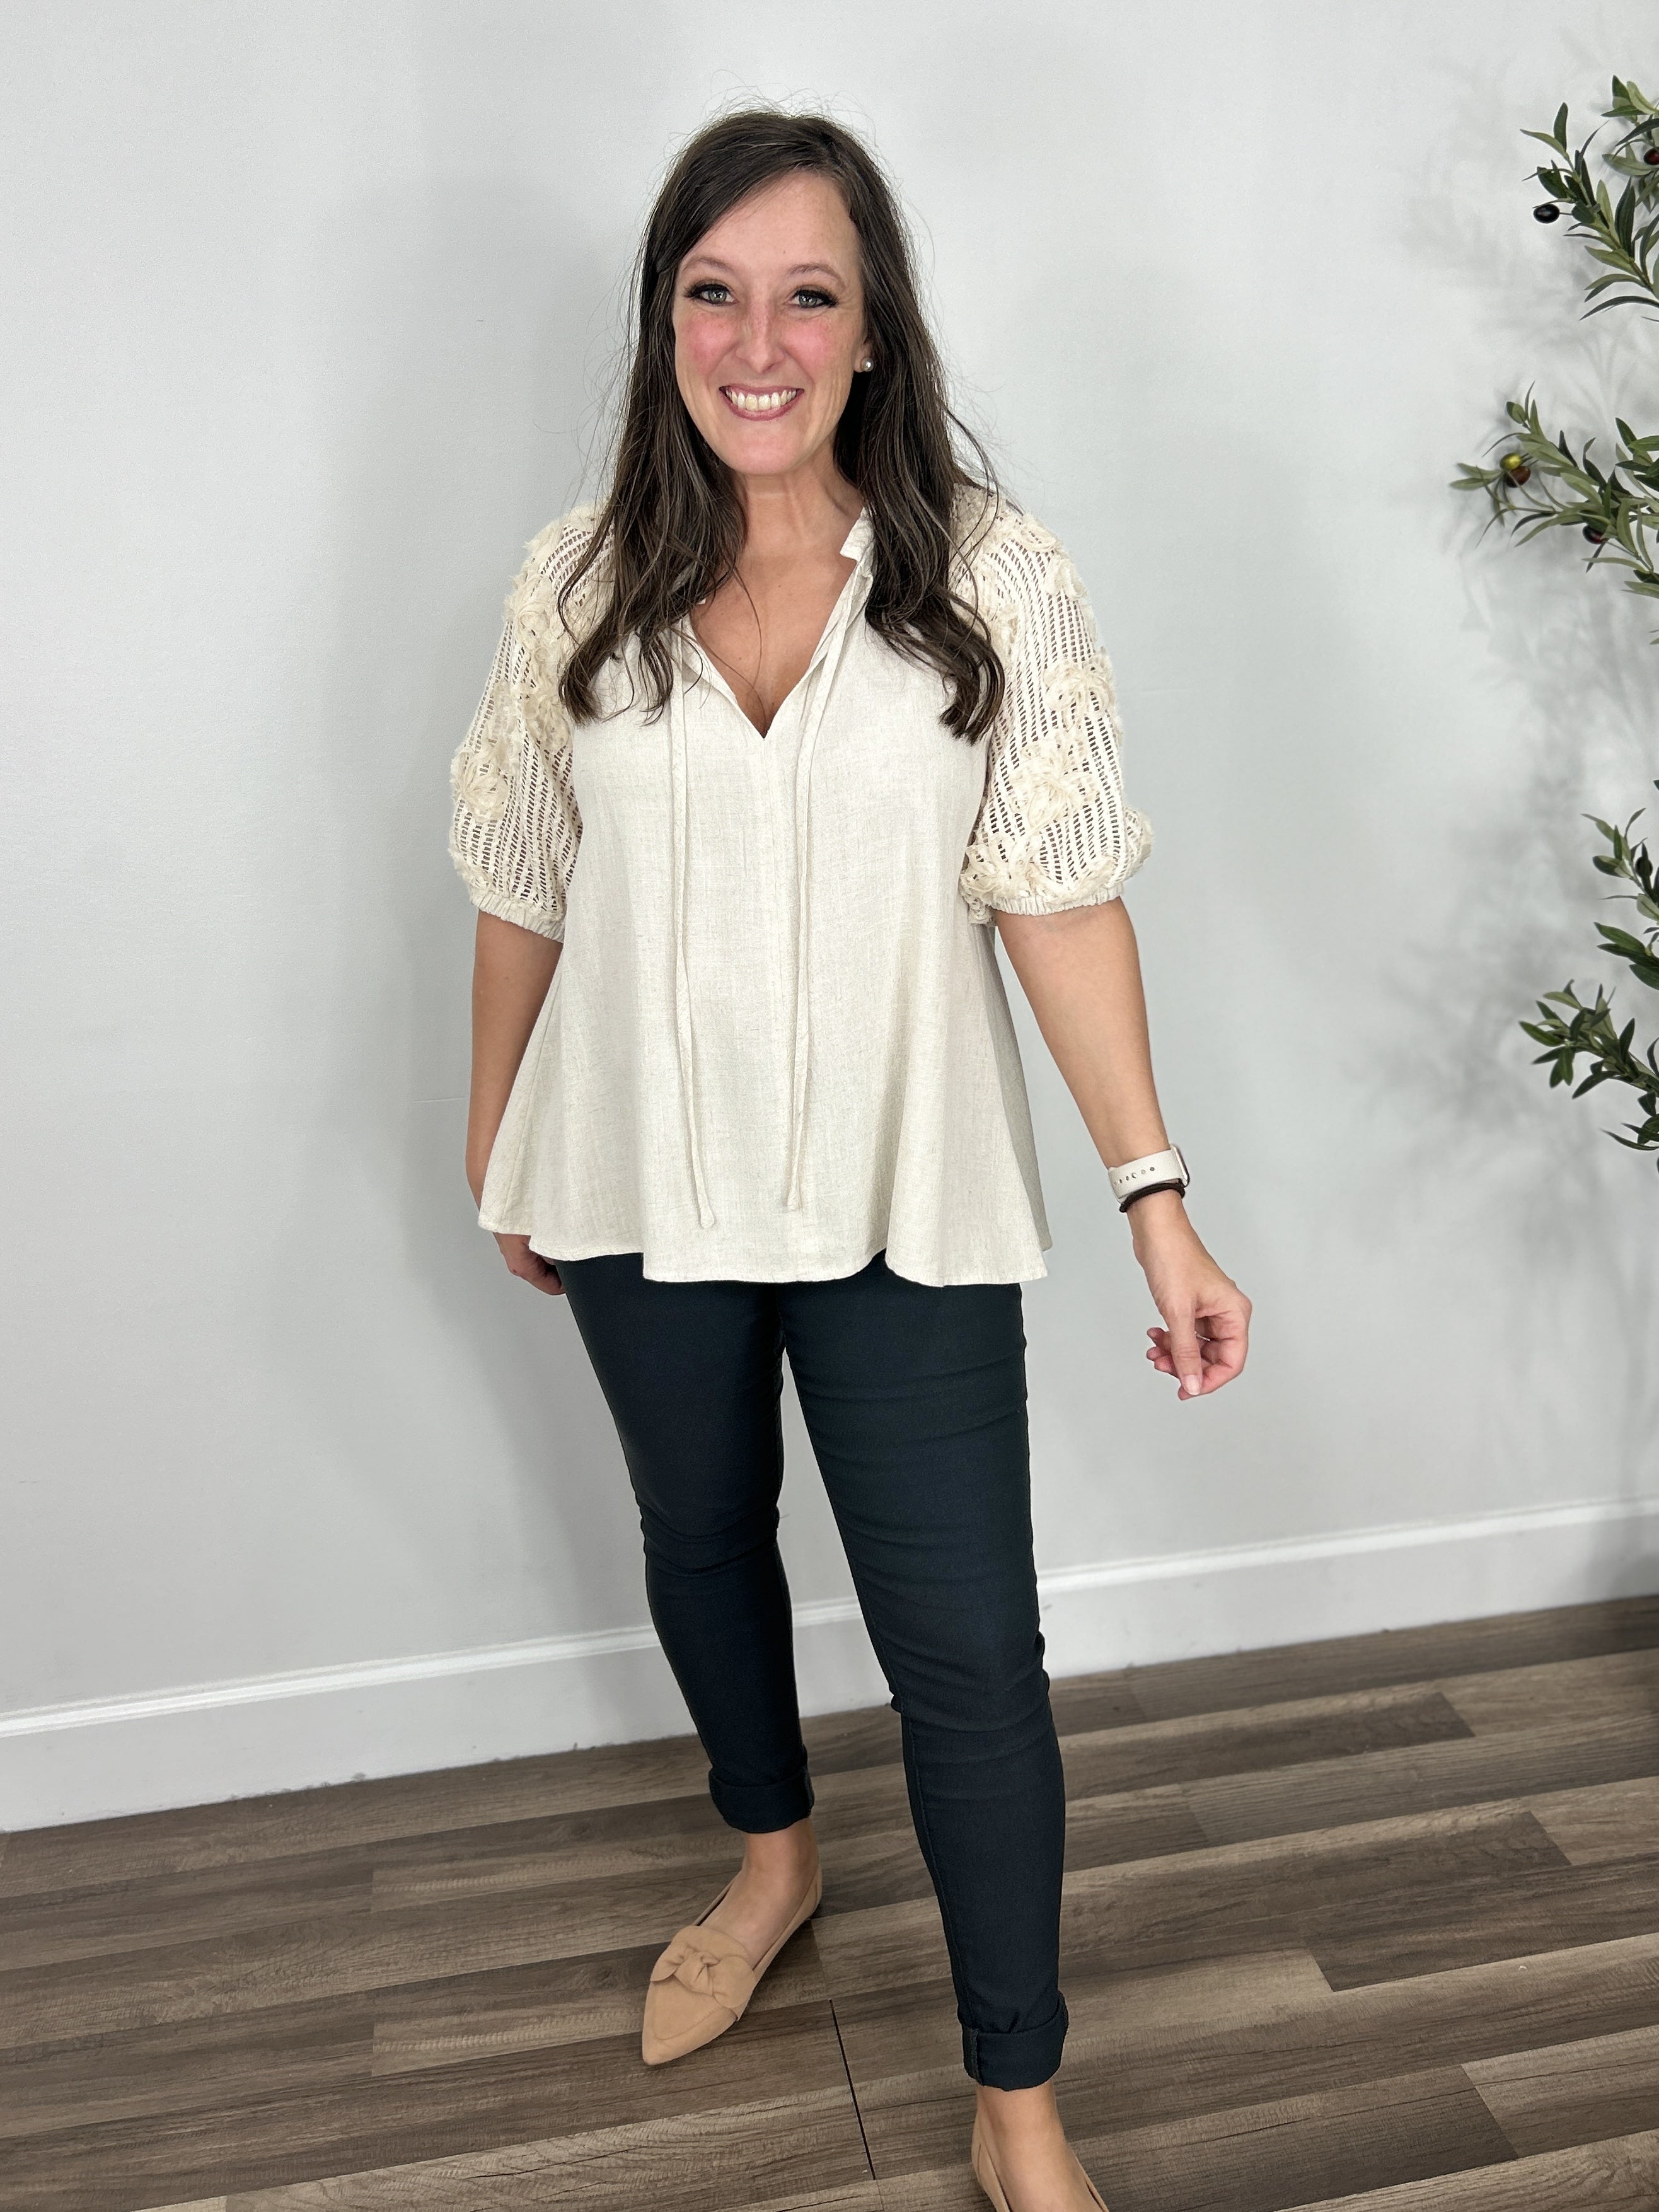 Women's oatmeal color v neck top with crochet short sleeves paired with charcoal skinny jeans and flat camel color shoes.